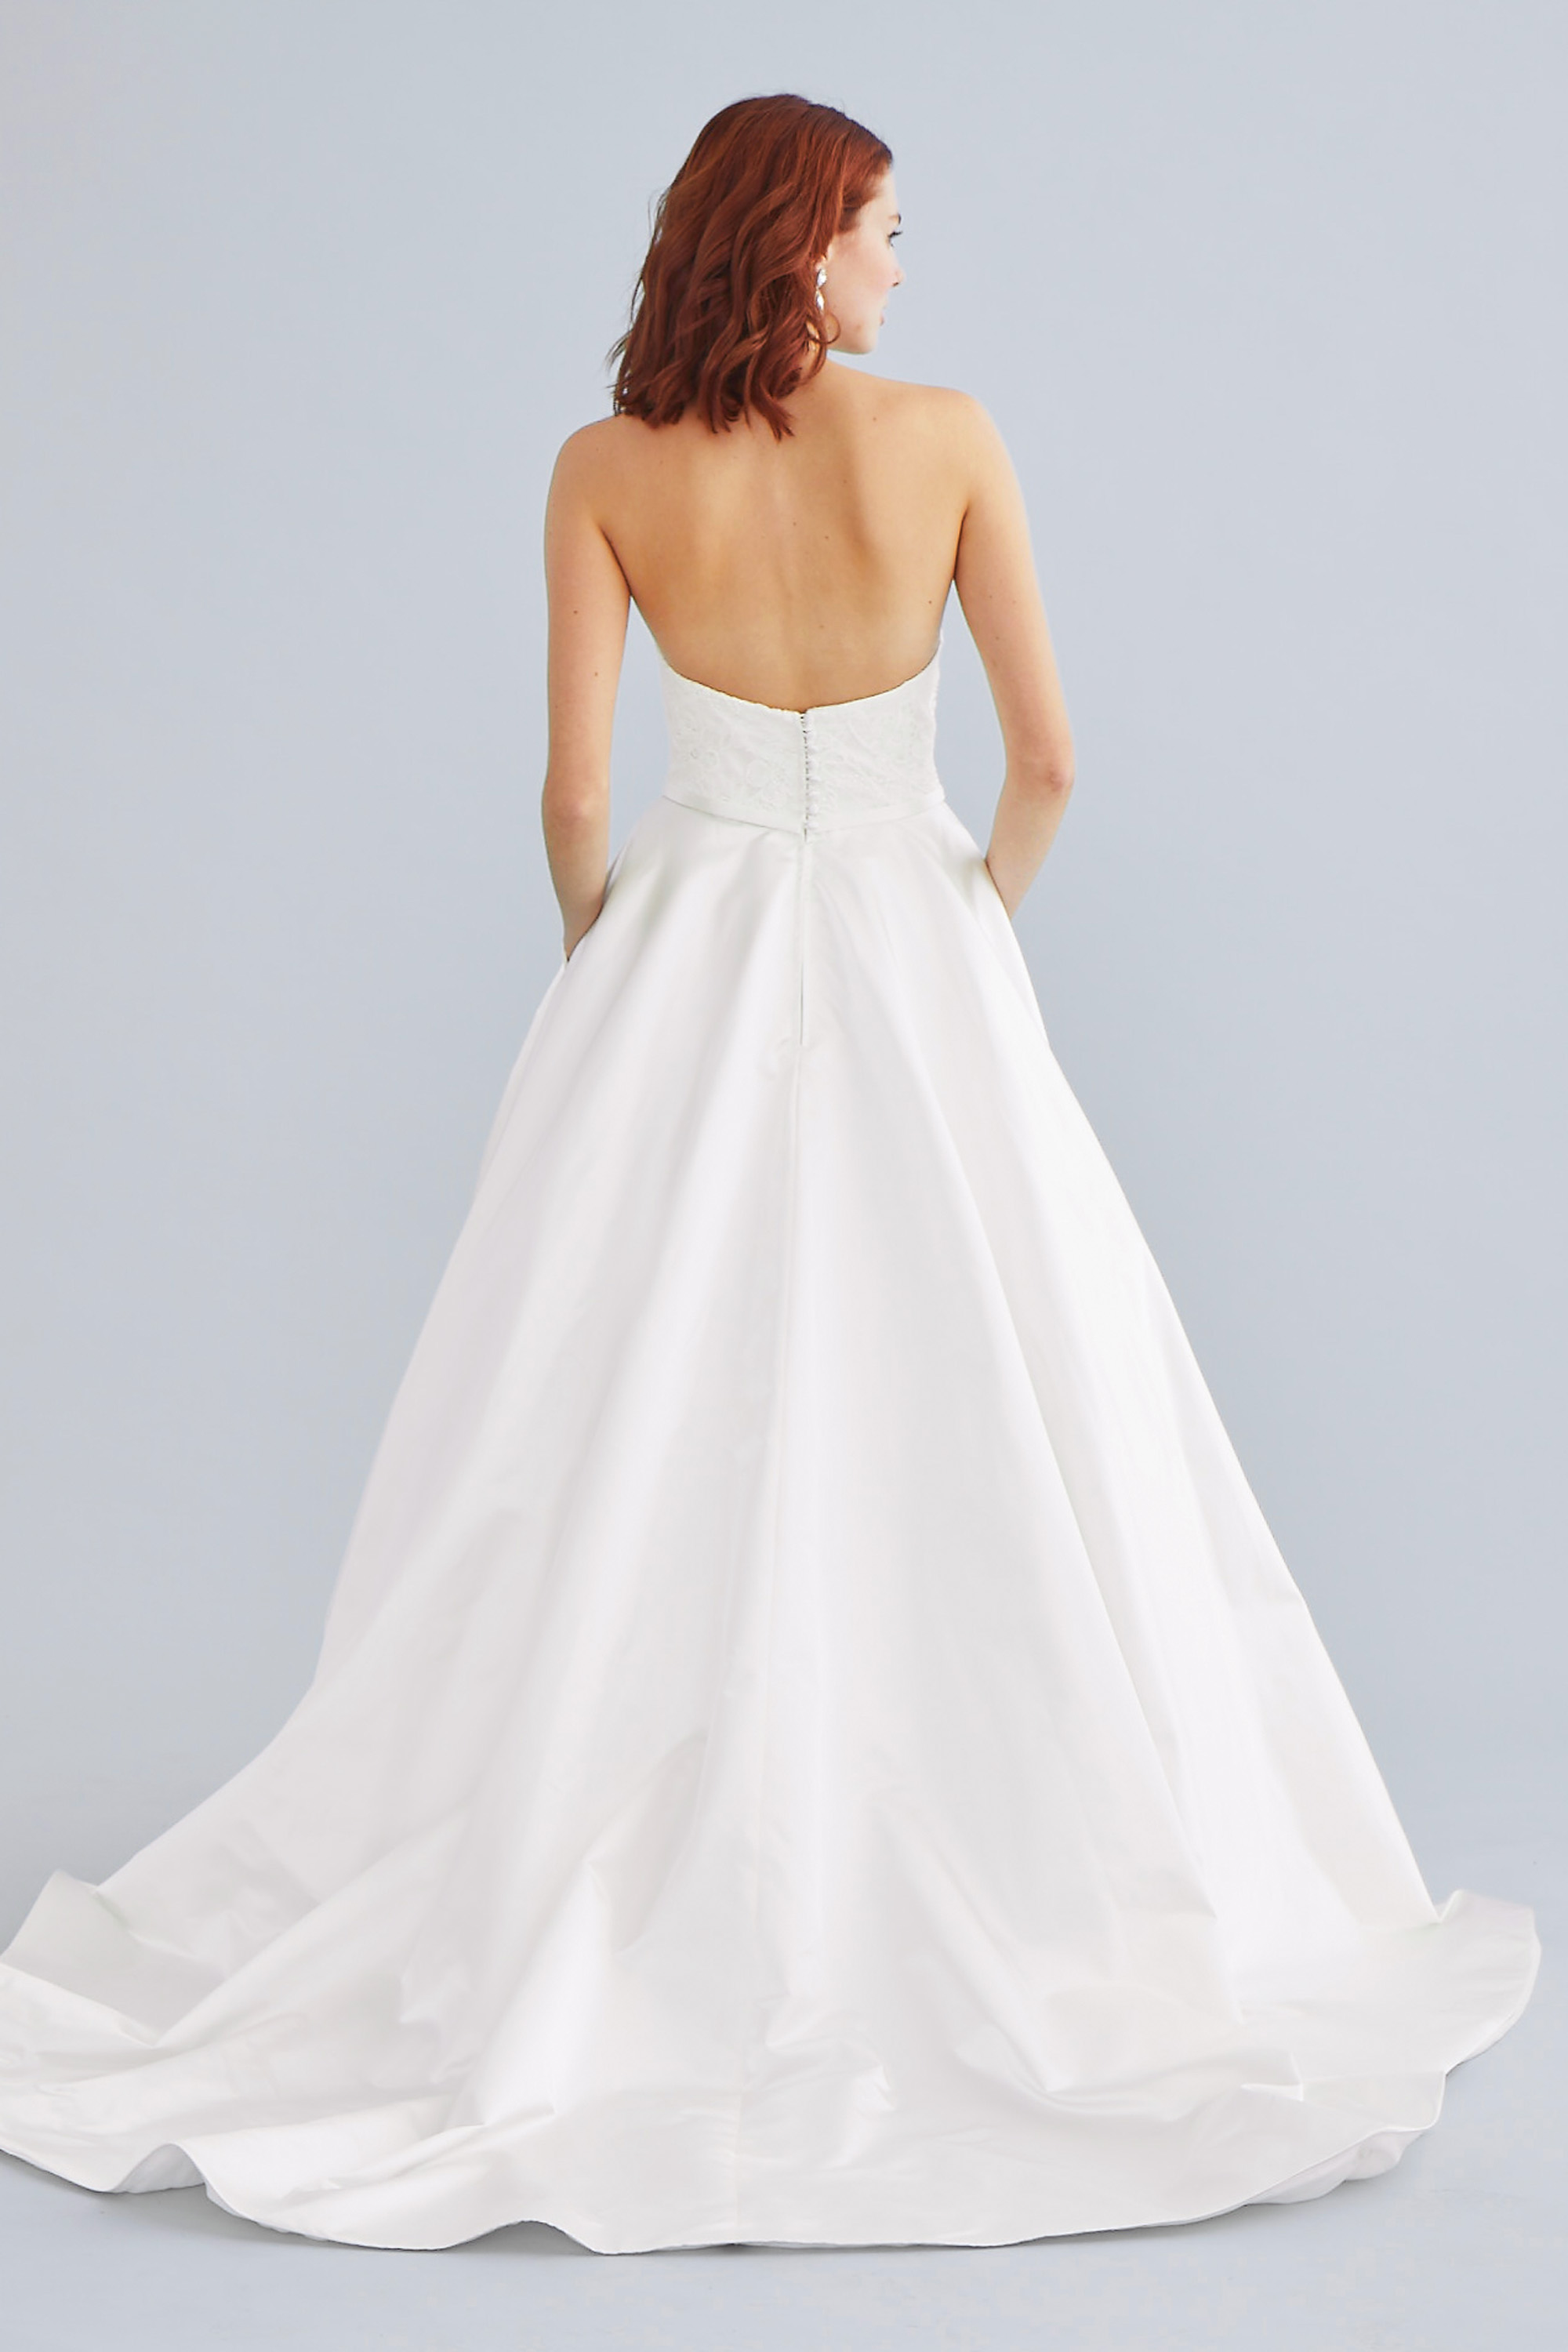 Brie gown